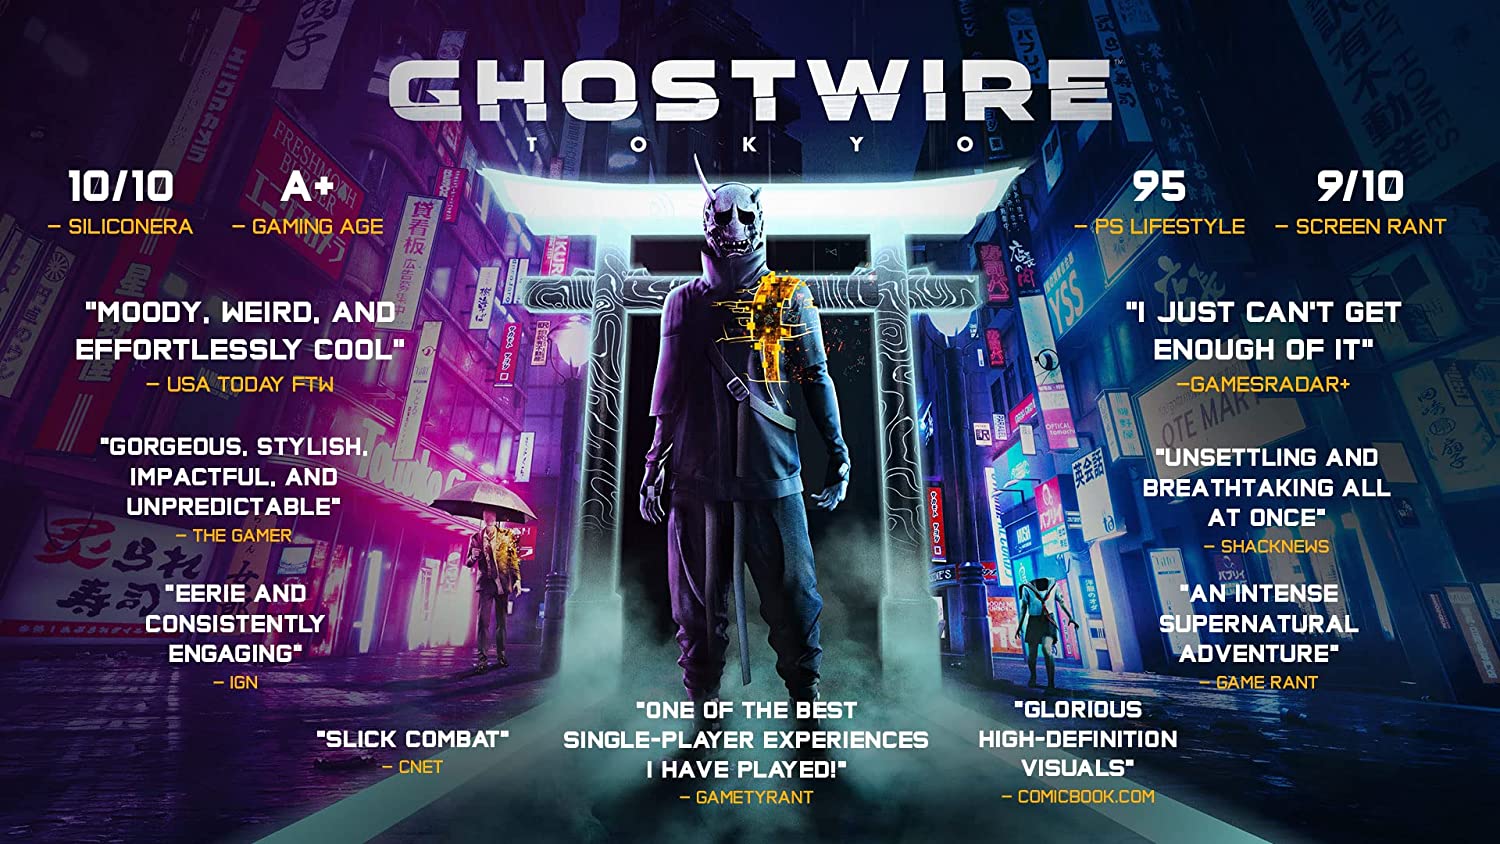 PlayStation 5 Ghostwire Tokyo Game New